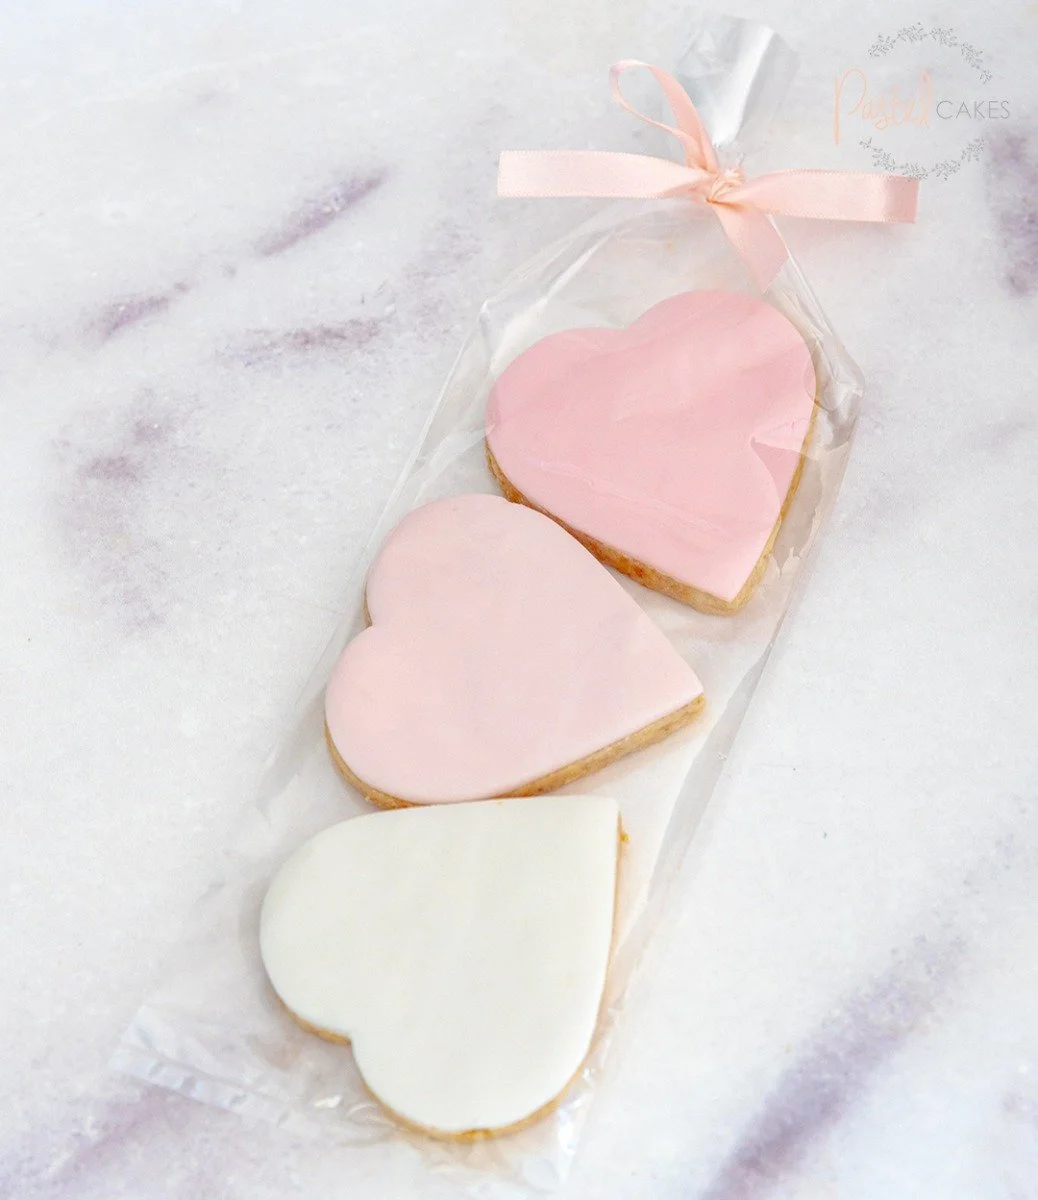 Valentine's Heart Cookies By Pastel Cakes